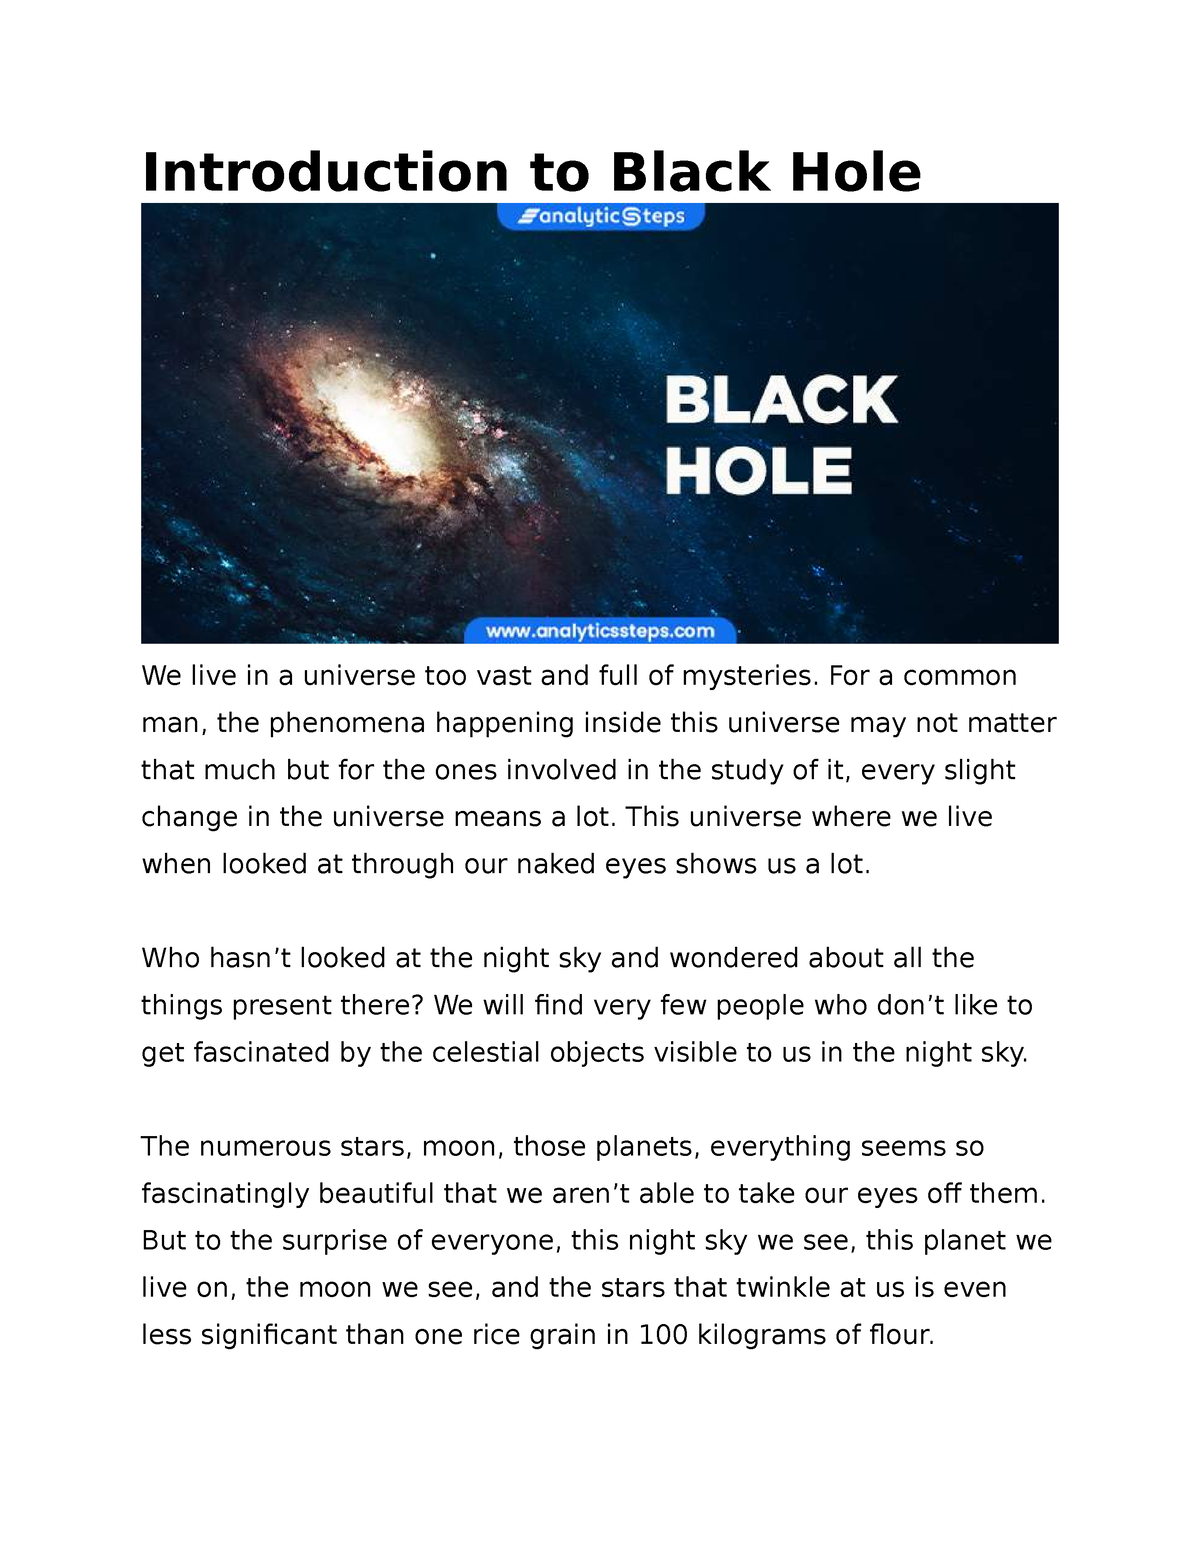 Introduction to Black Hole - For a common man, the phenomena happening ...